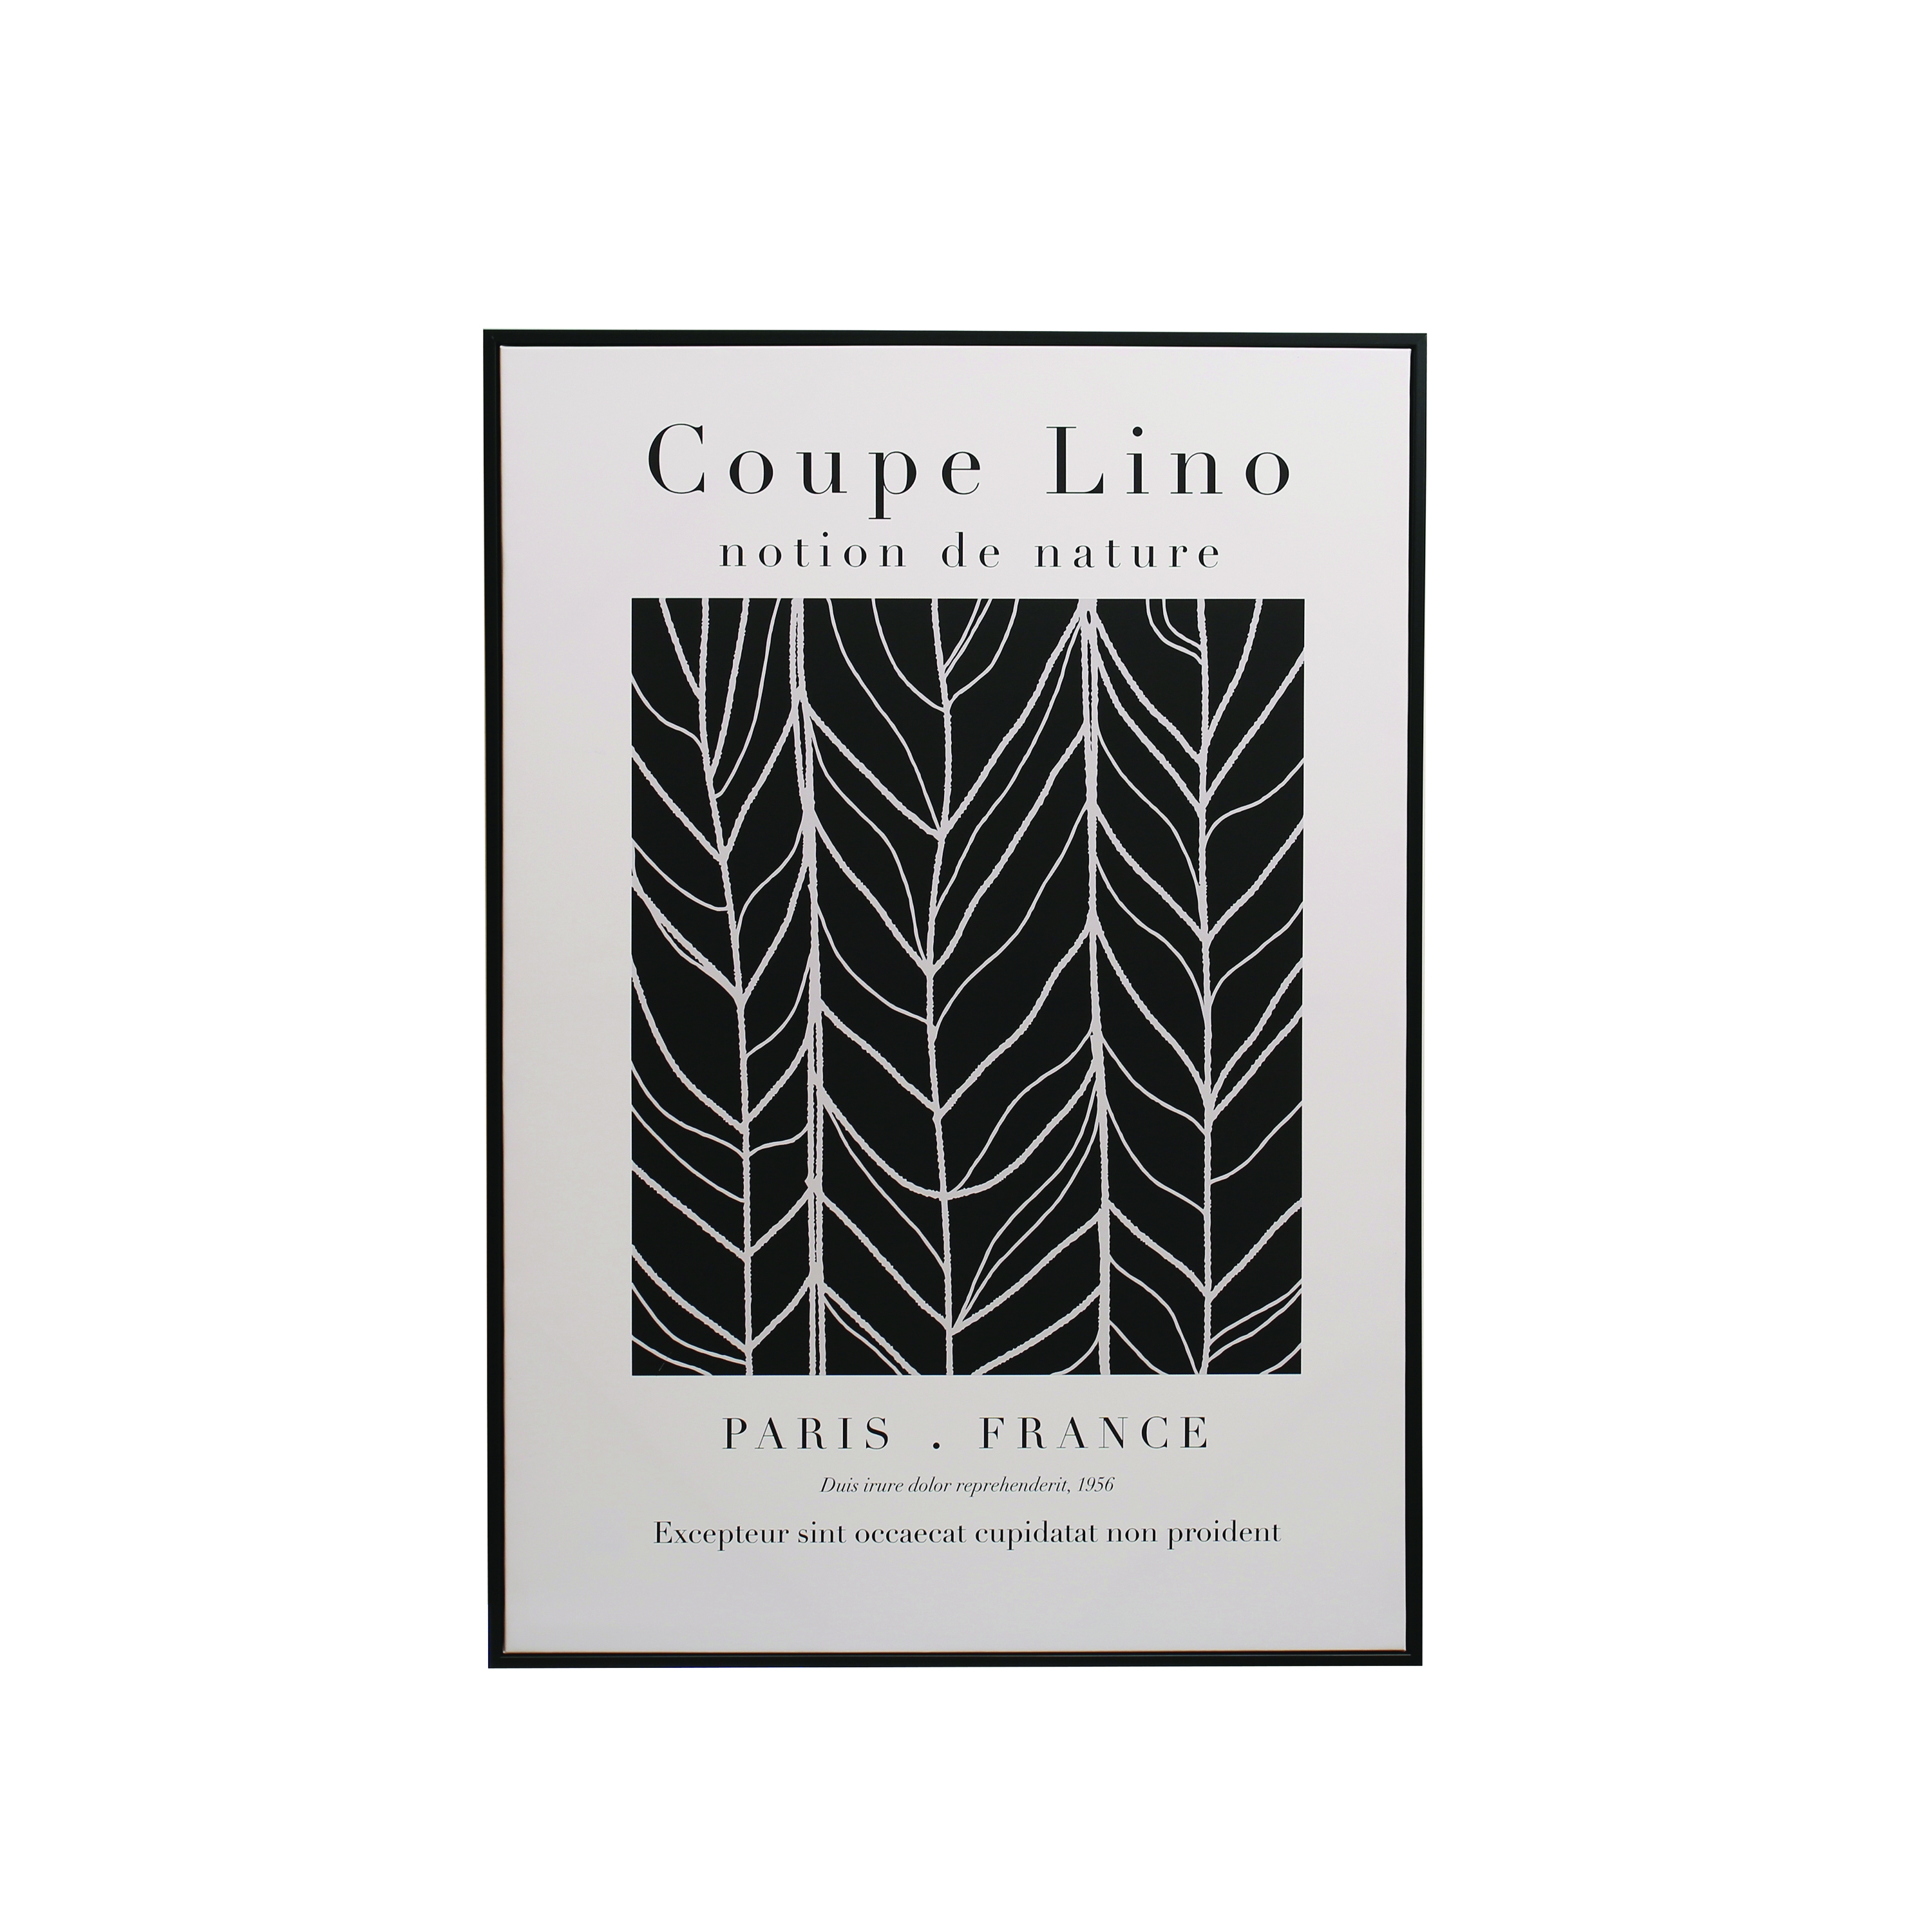 39.25 Inches Canvas Framed Wall Décor "Coupe Lino" Text, Black and White - Image 0